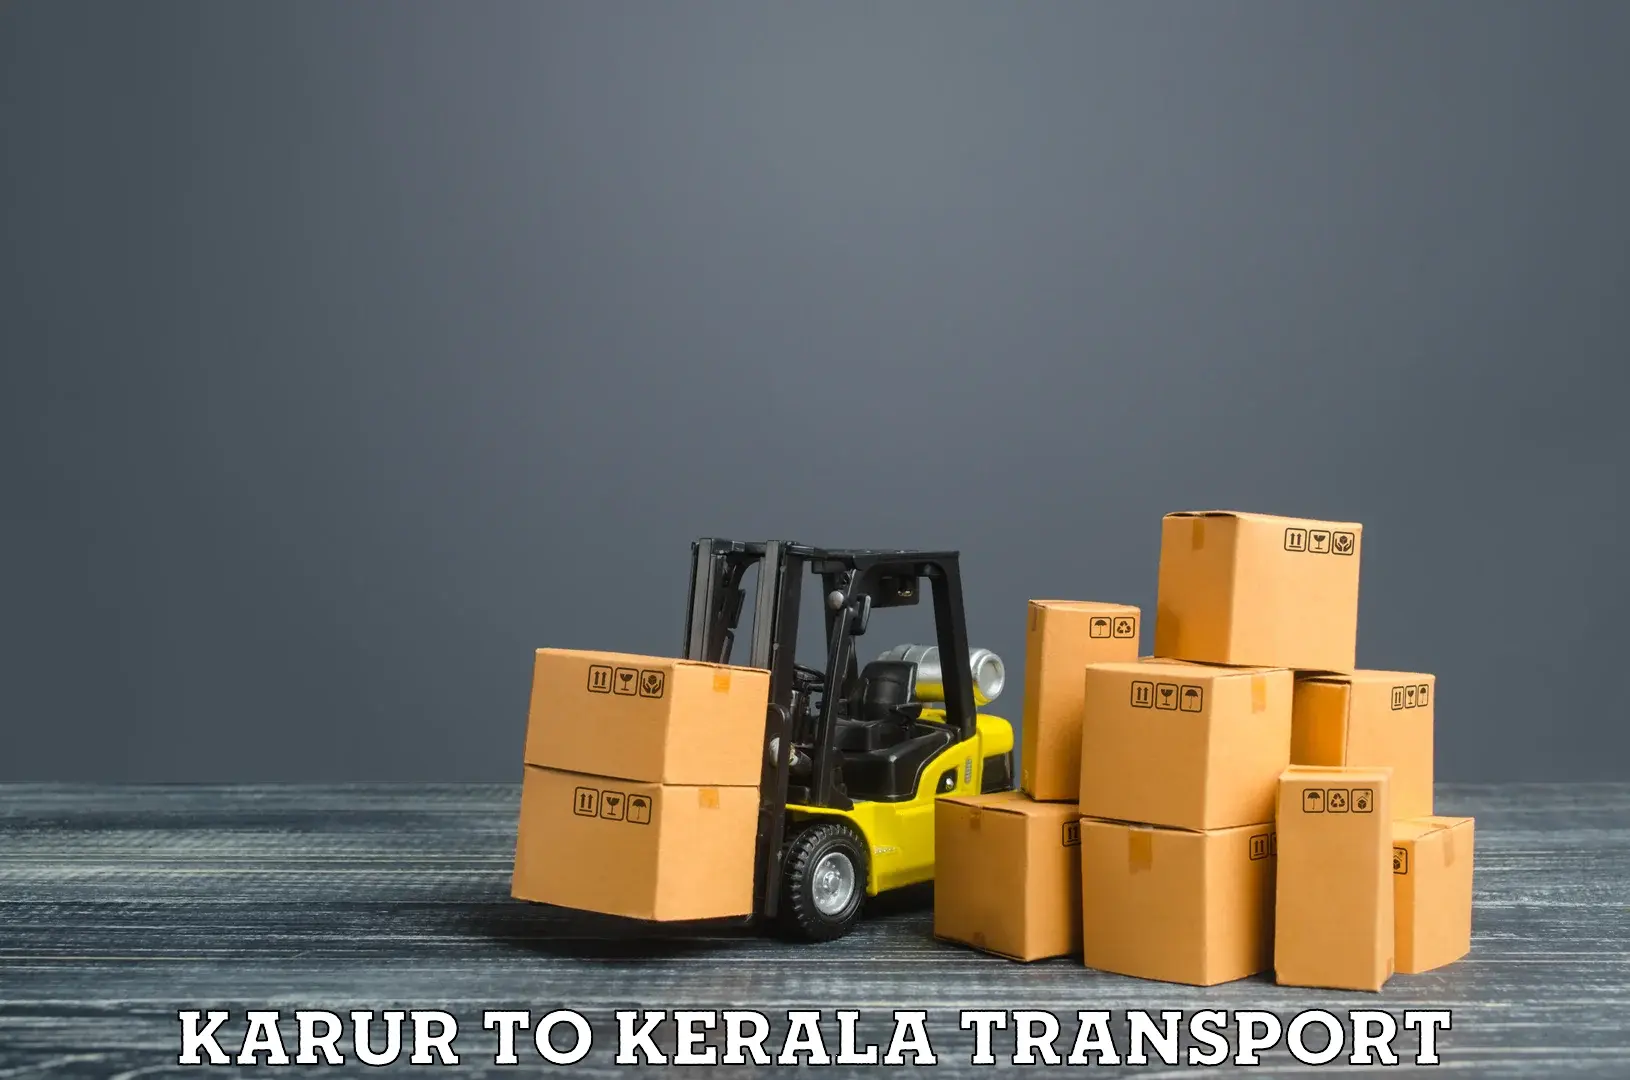 Daily transport service Karur to Mananthavady